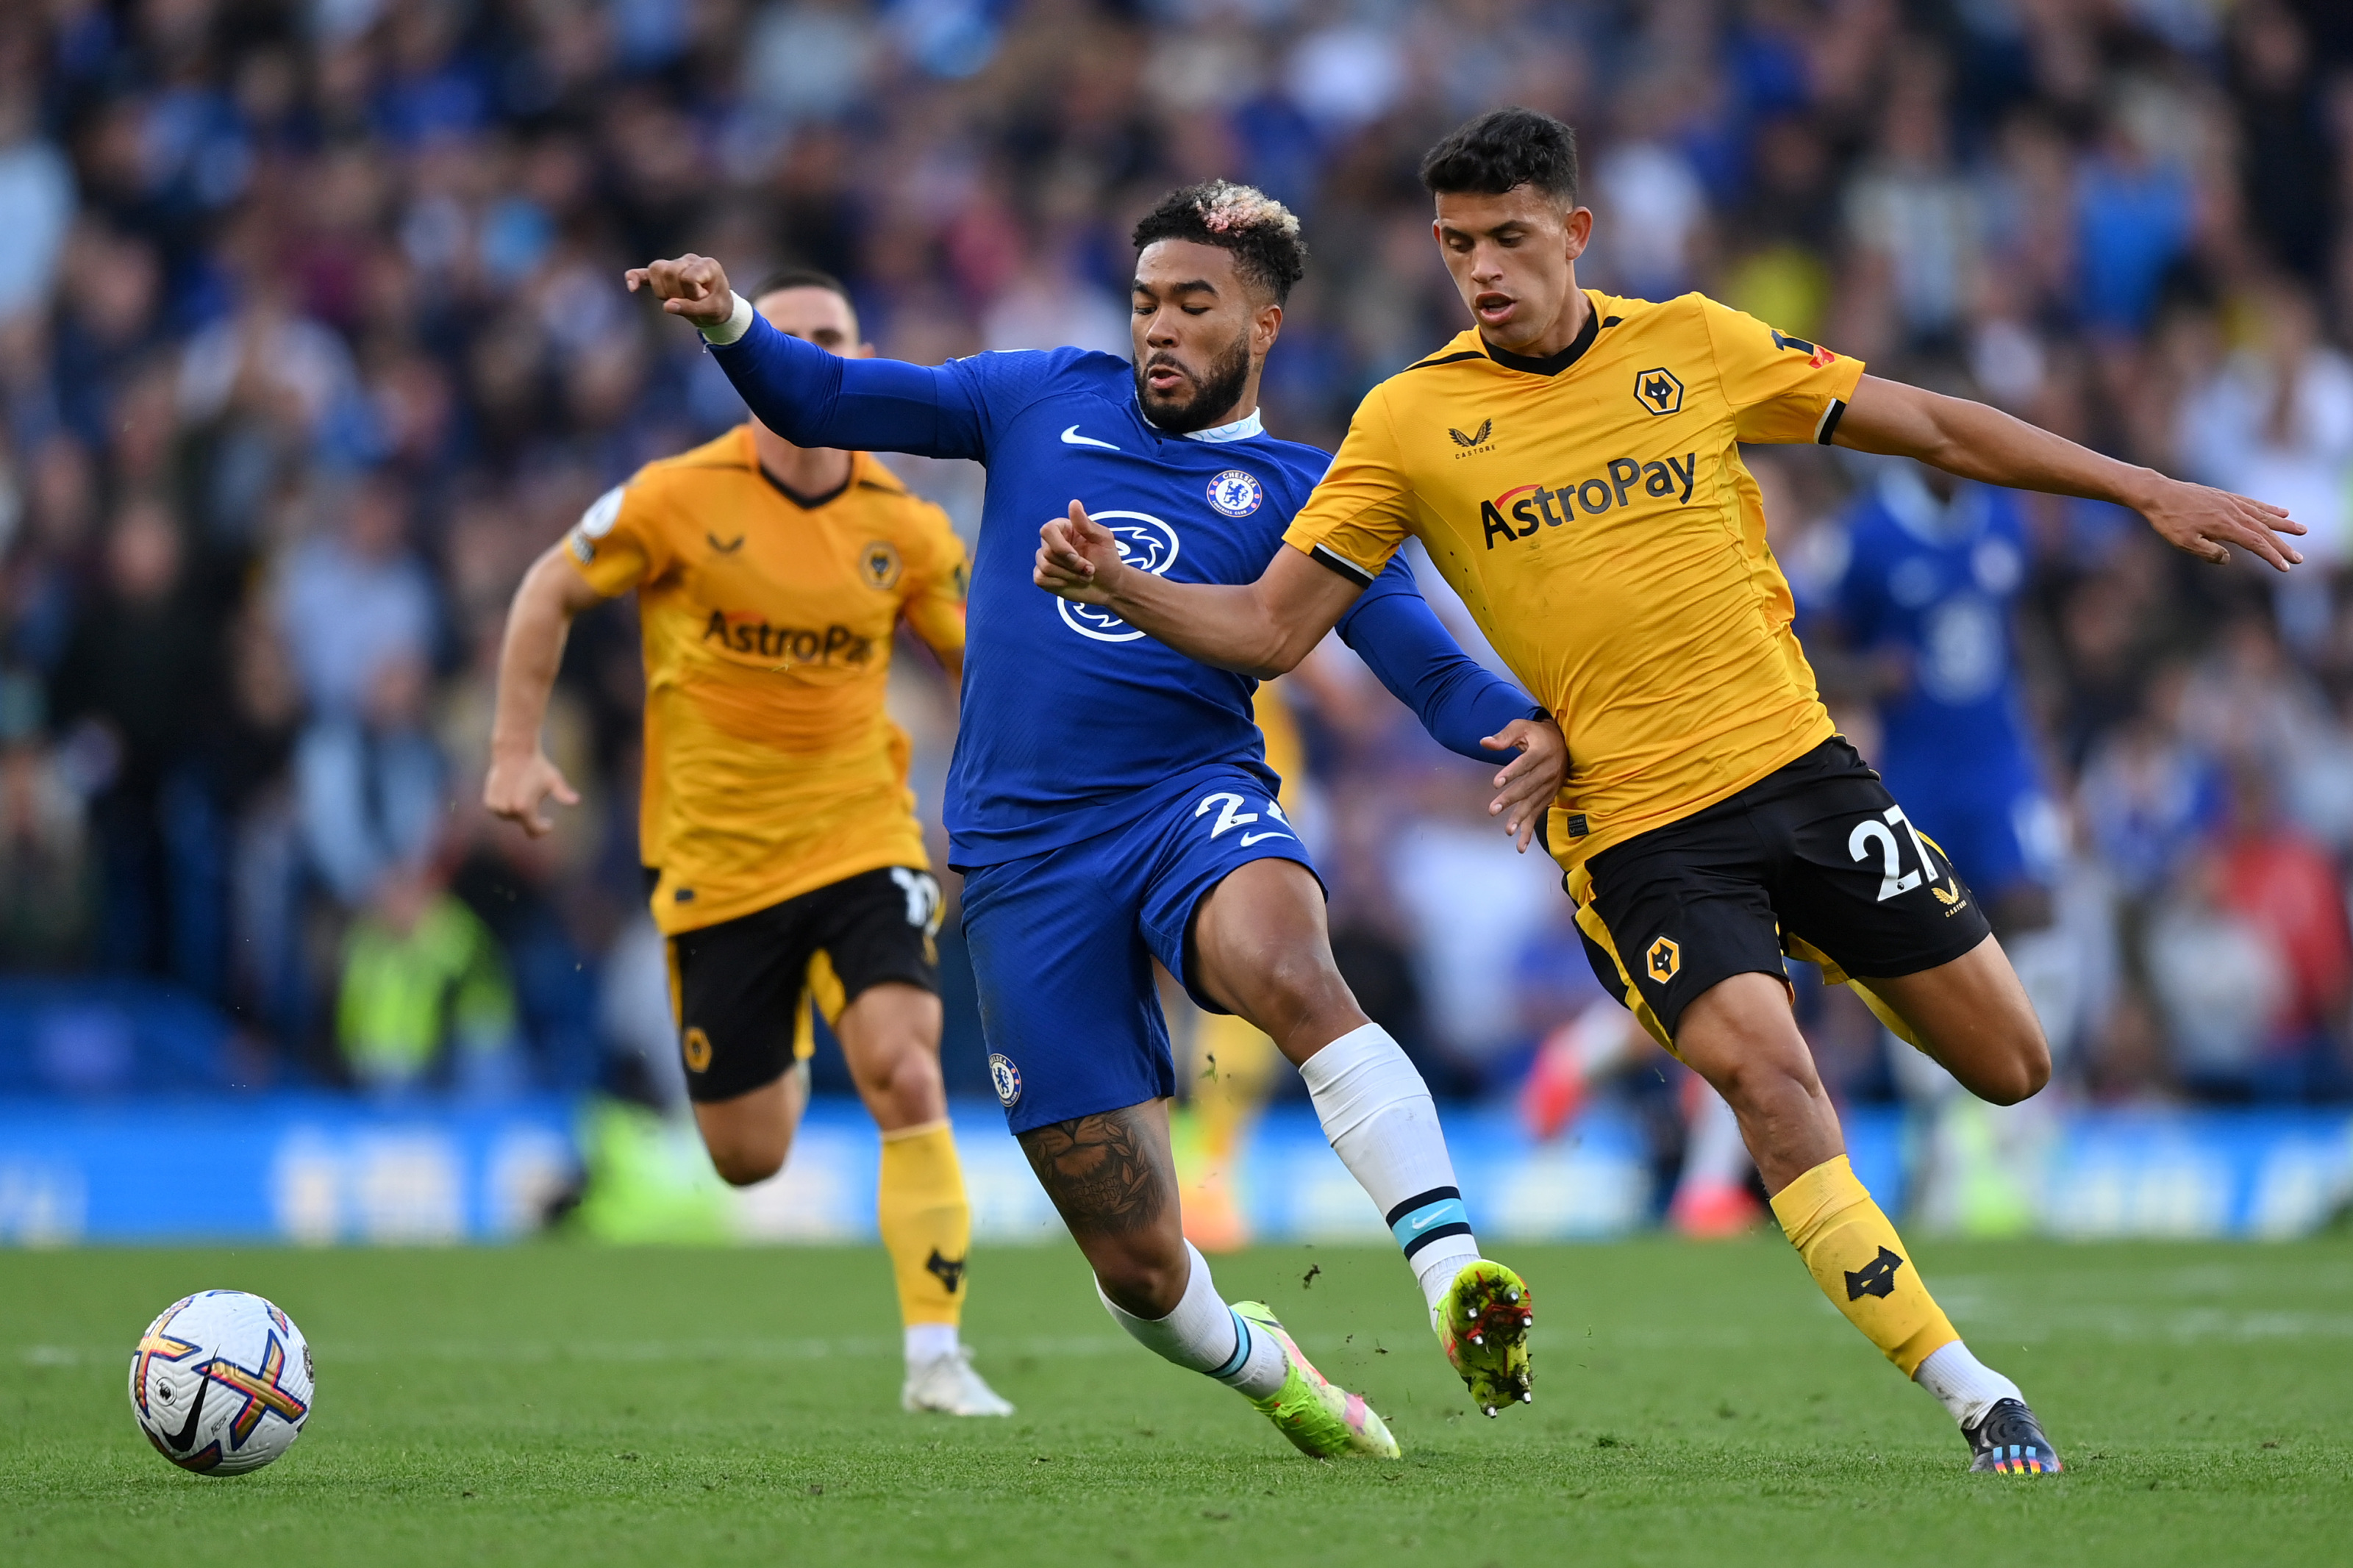 Wolverhampton Wanderers vs Chelsea 3 things to look out for